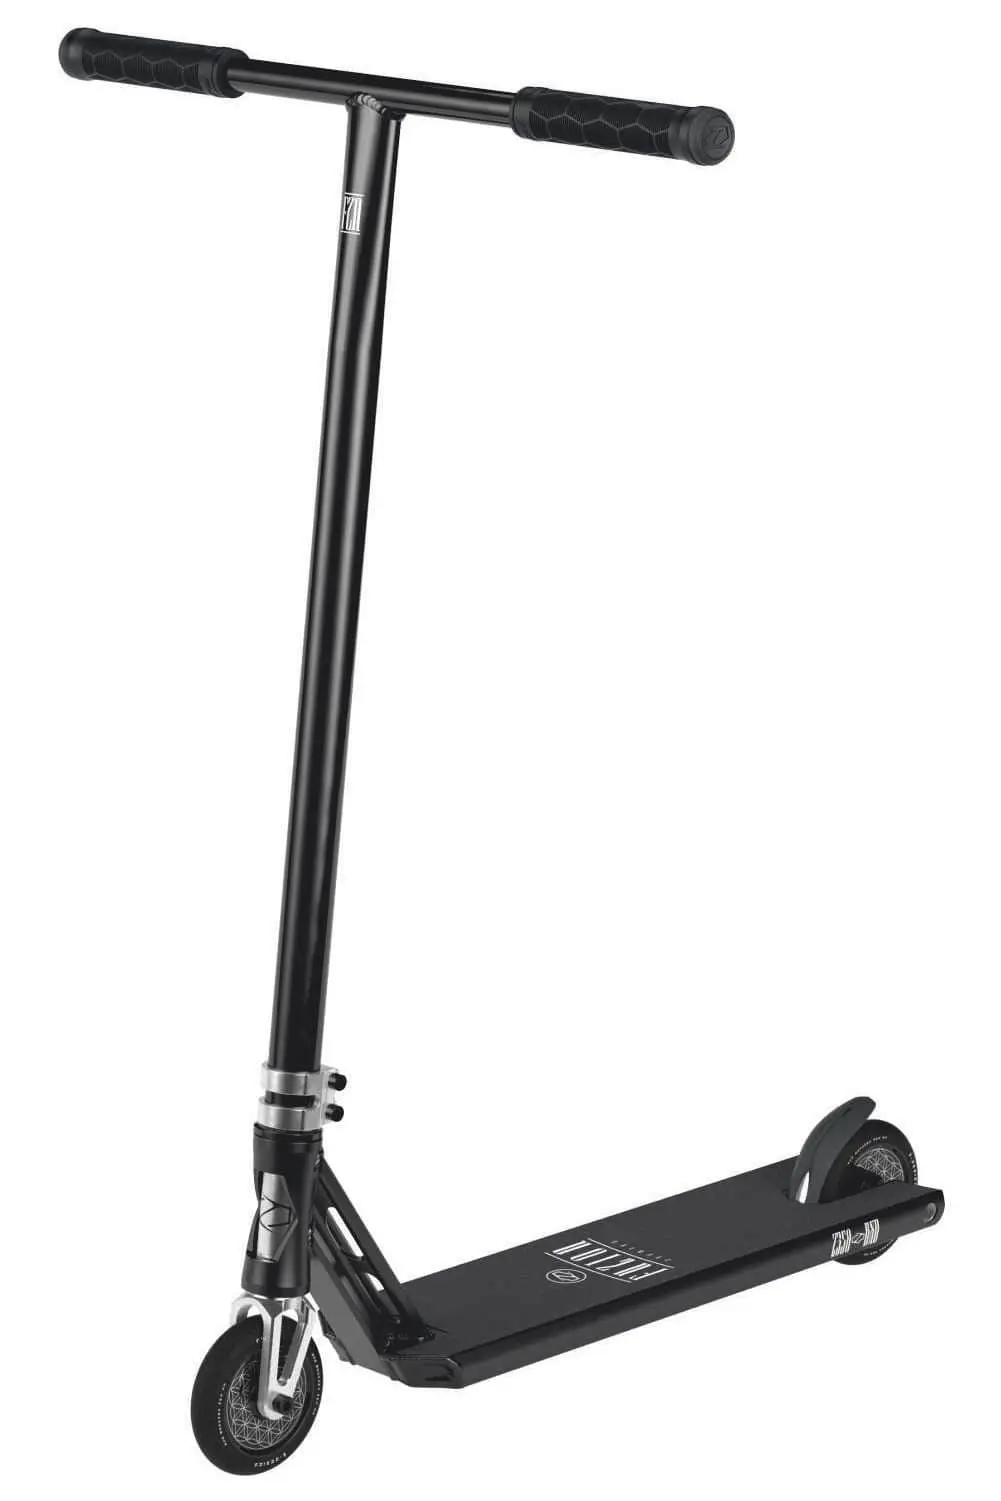 Fuzion Z350 Boxed 2022 Pro Scooter